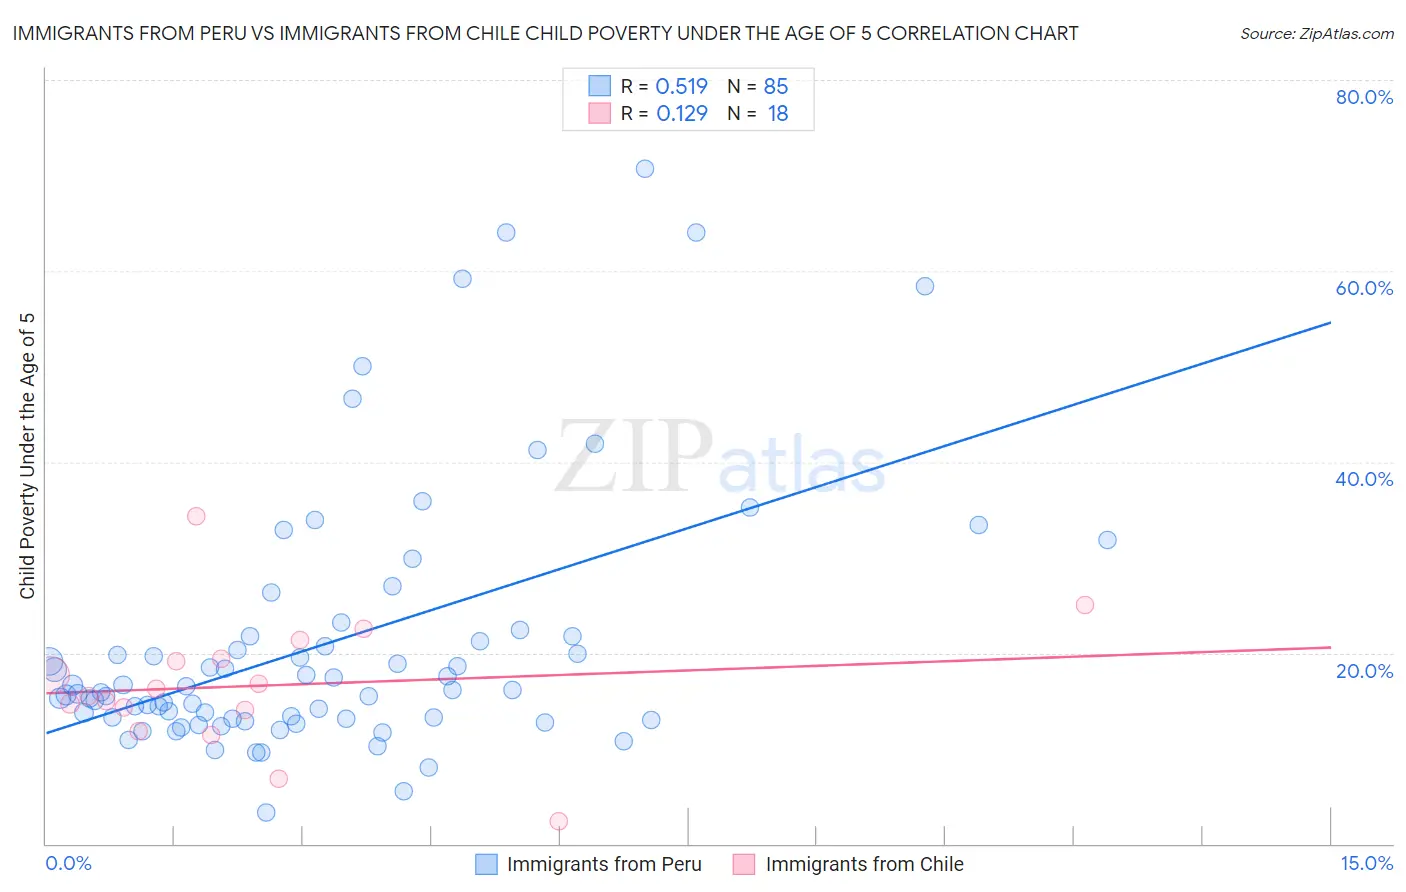 Immigrants from Peru vs Immigrants from Chile Child Poverty Under the Age of 5